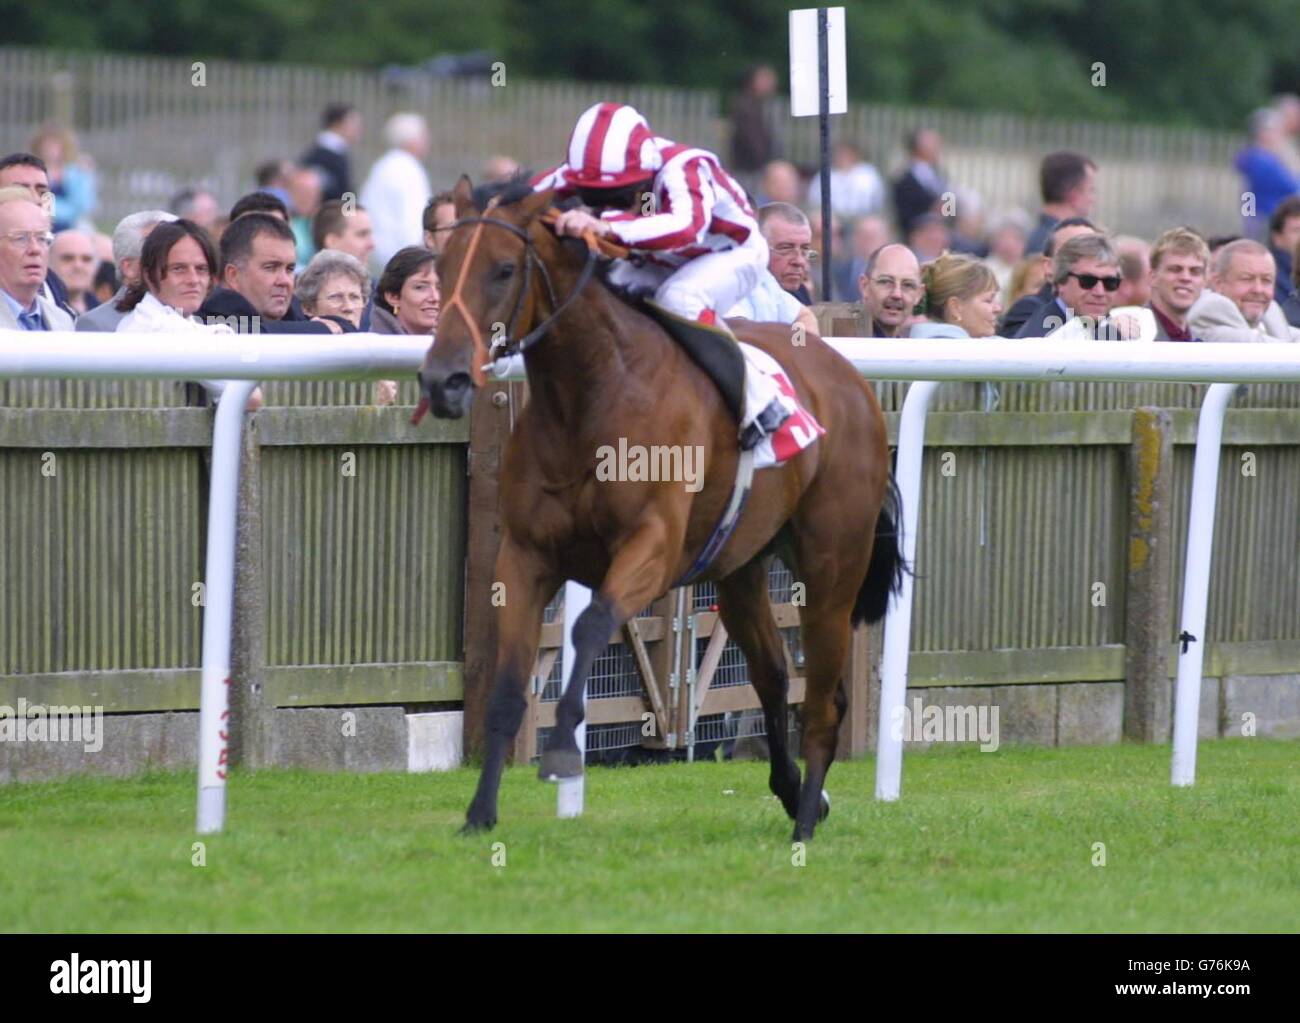 Roundtree ridden by Jimmy Quinn. Roundtree ridden by Jimmy Quinn, wins the Sarah Victoria Jane Fillies' Conditions Stakes Class C at Newmarket. Stock Photo